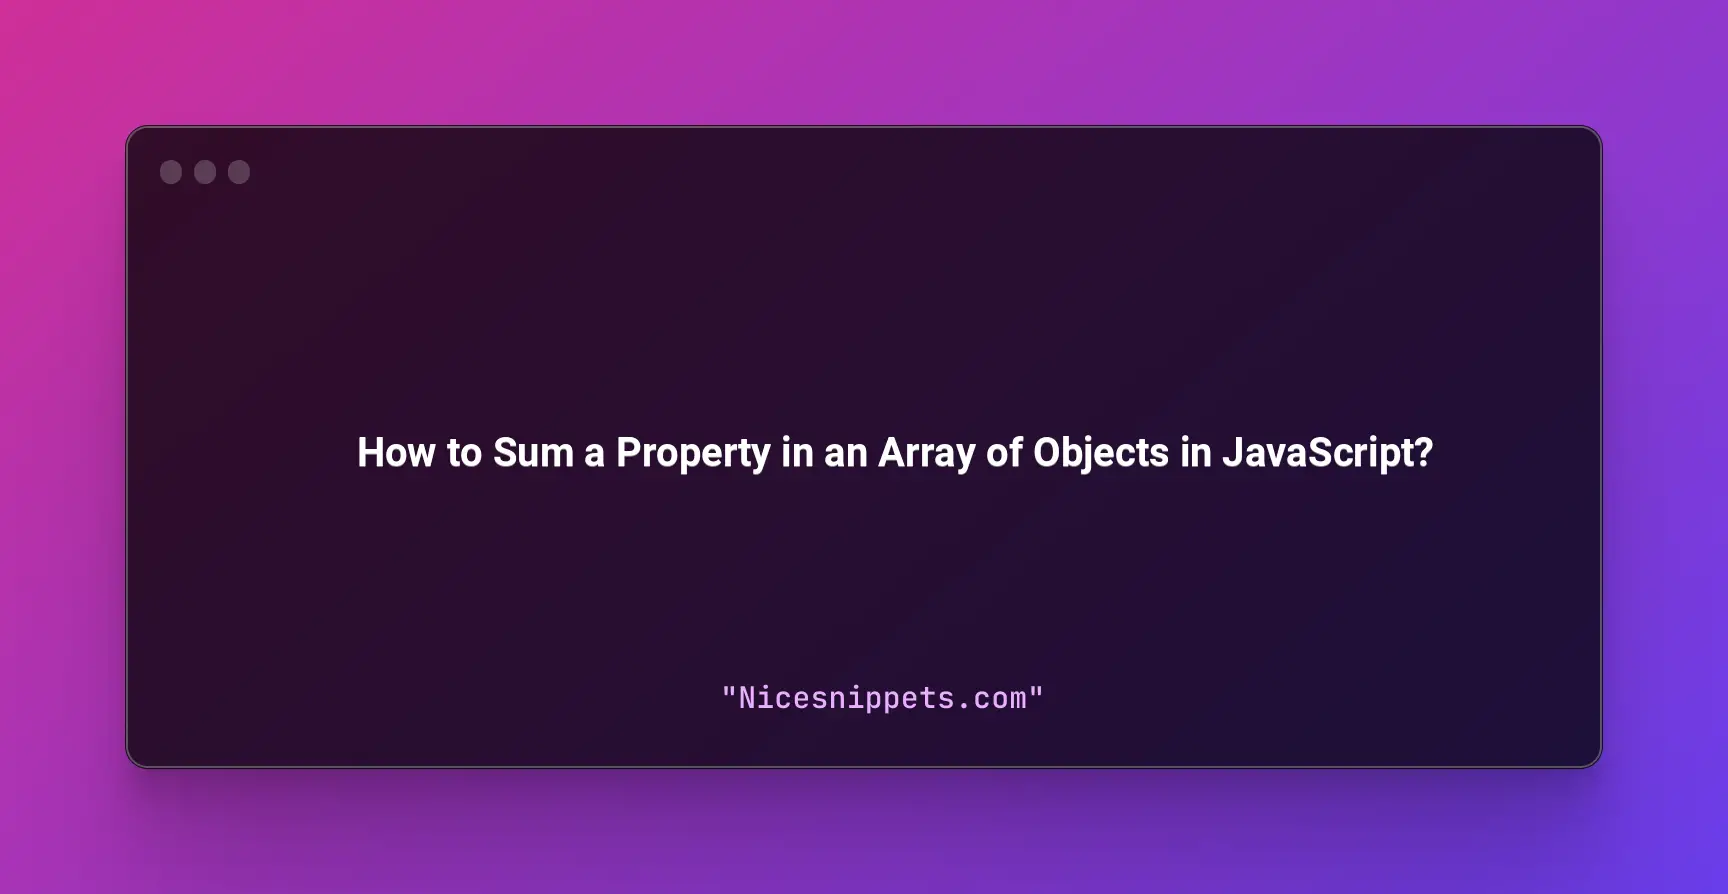 How to Sum a Property in an Array of Objects in JavaScript?